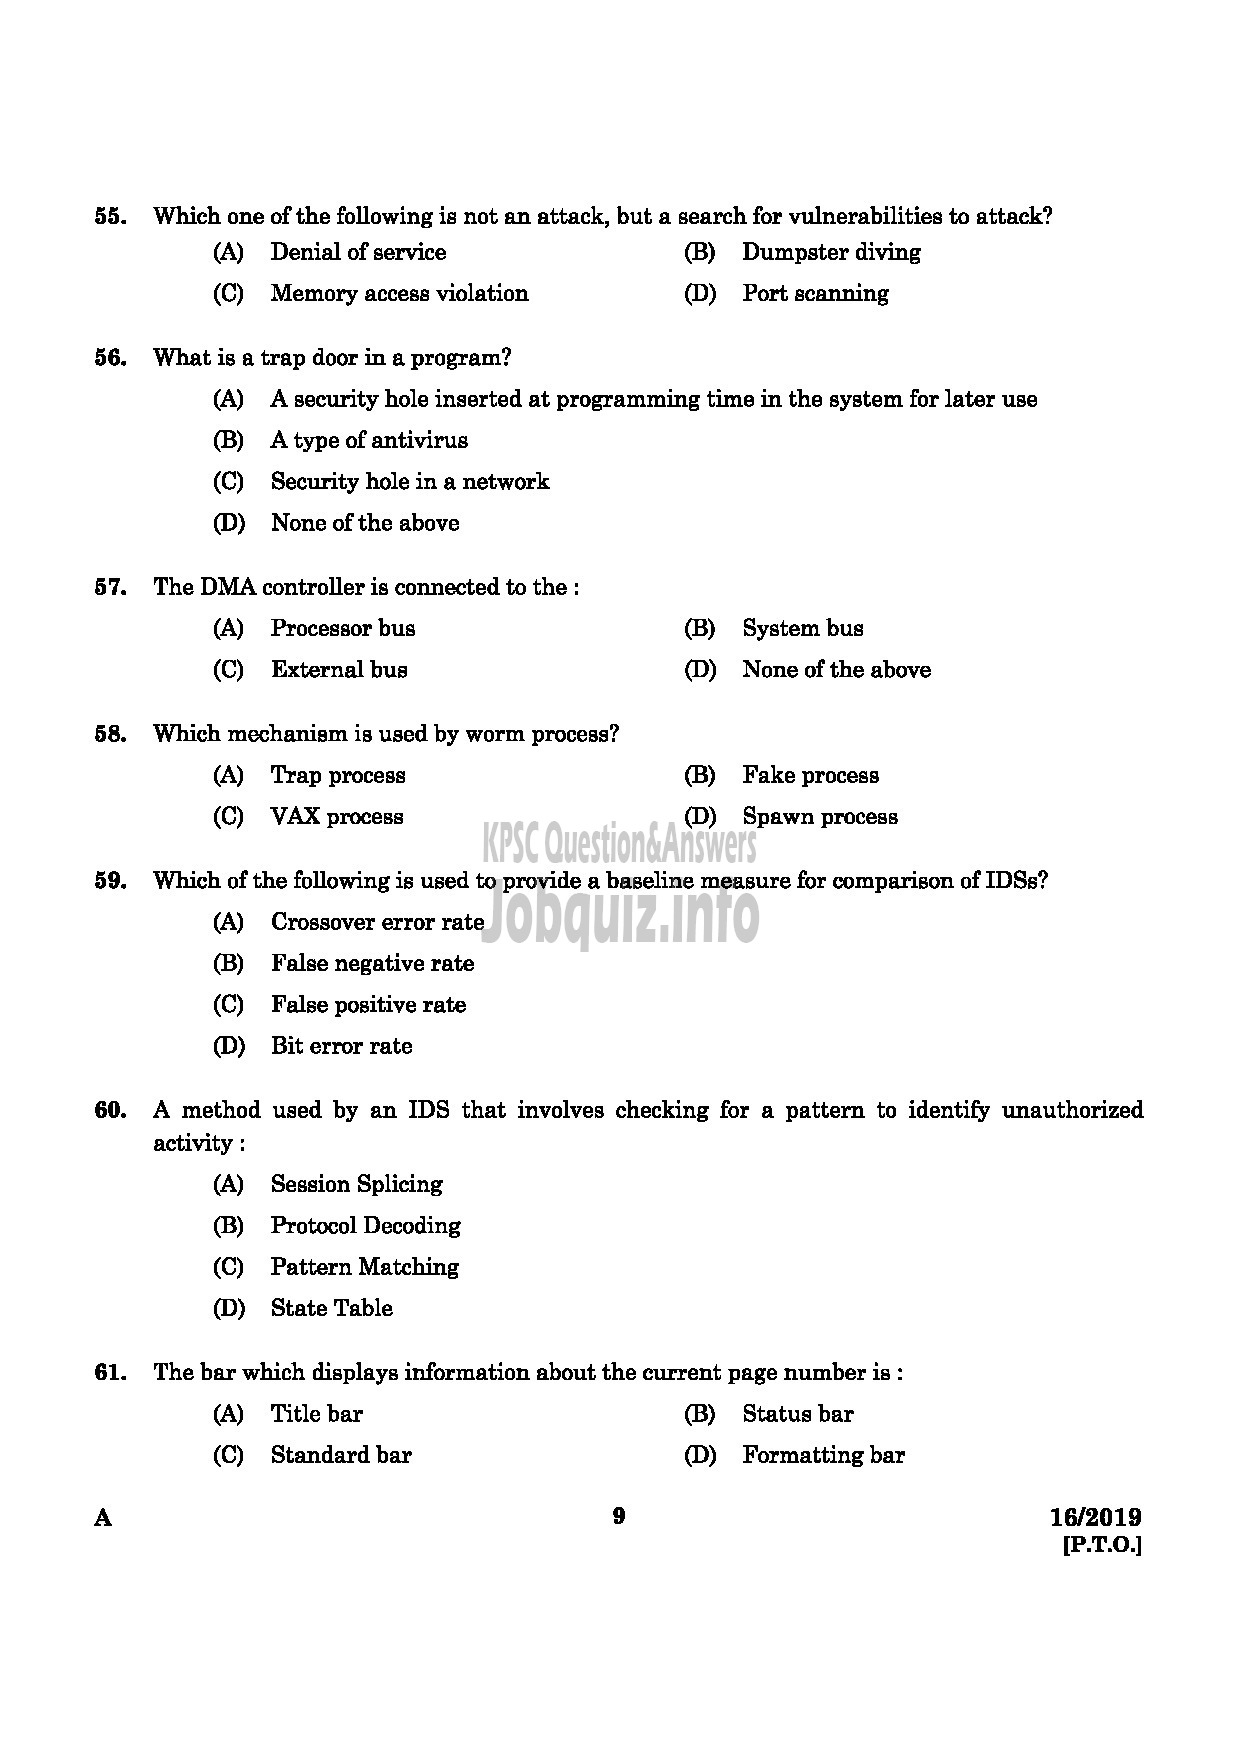 Kerala PSC Question Paper - JUNIOR INSTRUCTOR SOFTWARE TESTING ASSISTANT INDUSTRIAL TRAINING -7